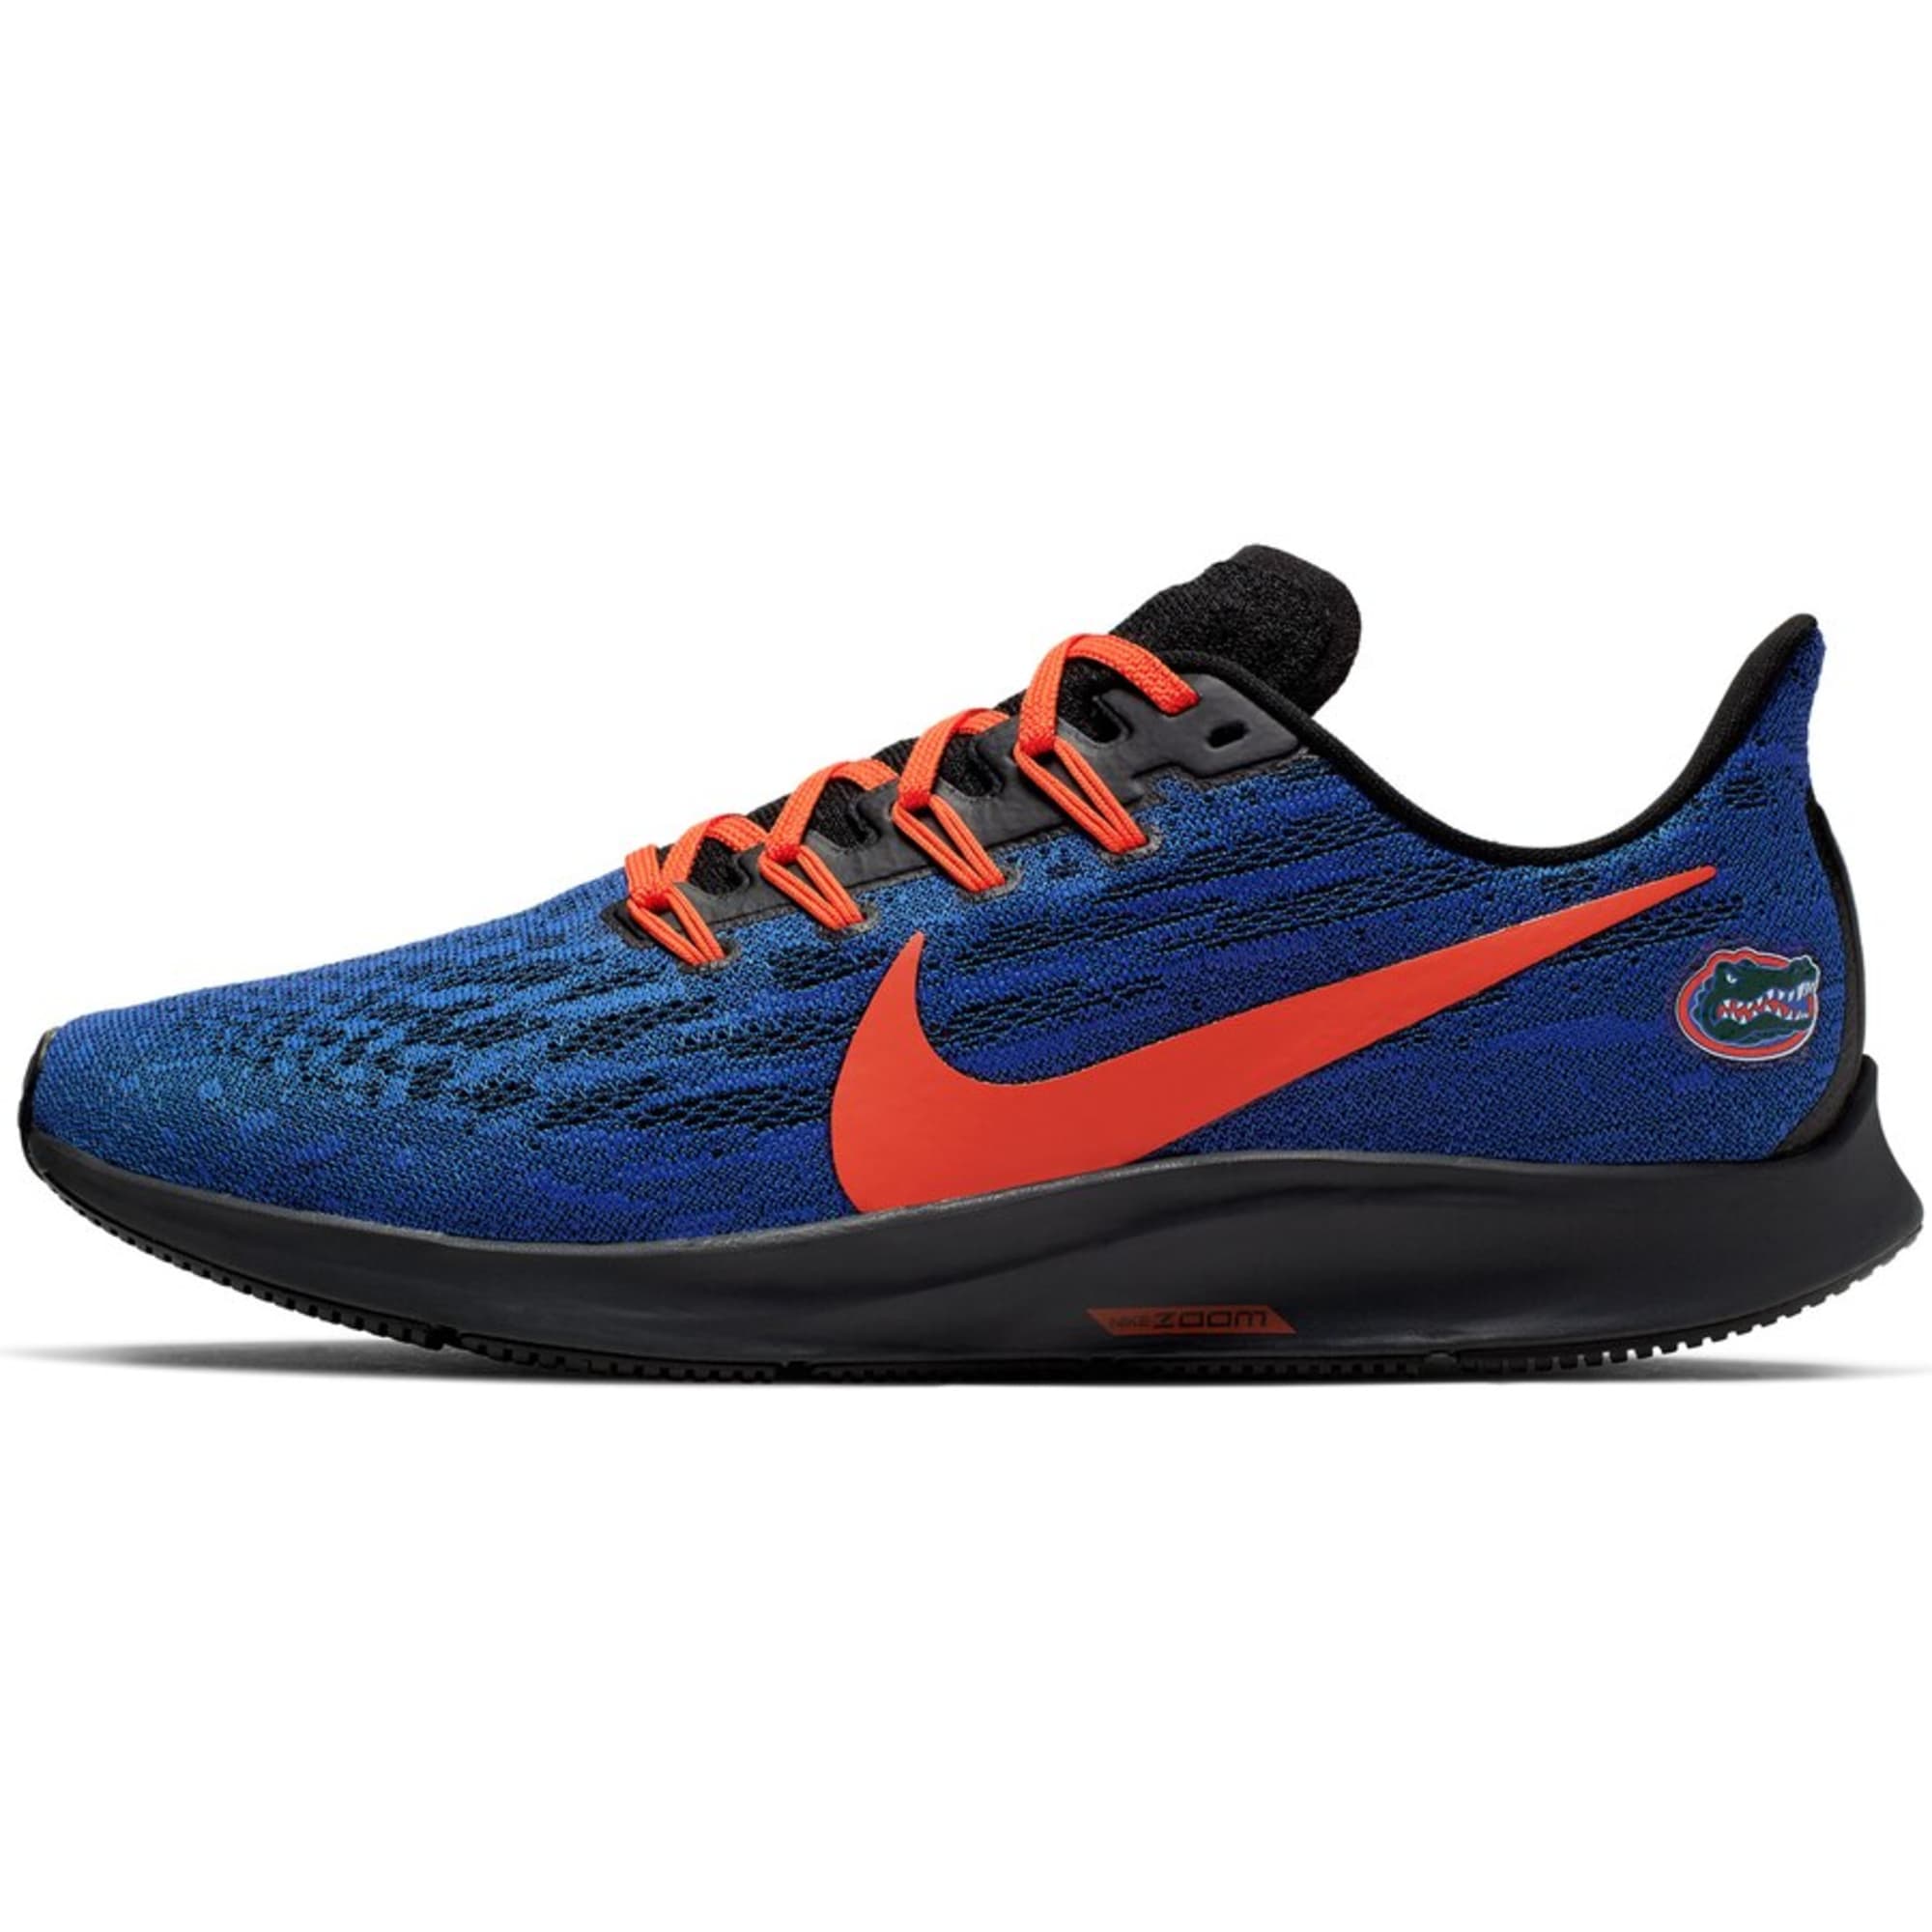 Florida Gators fans need these new Nike shoes